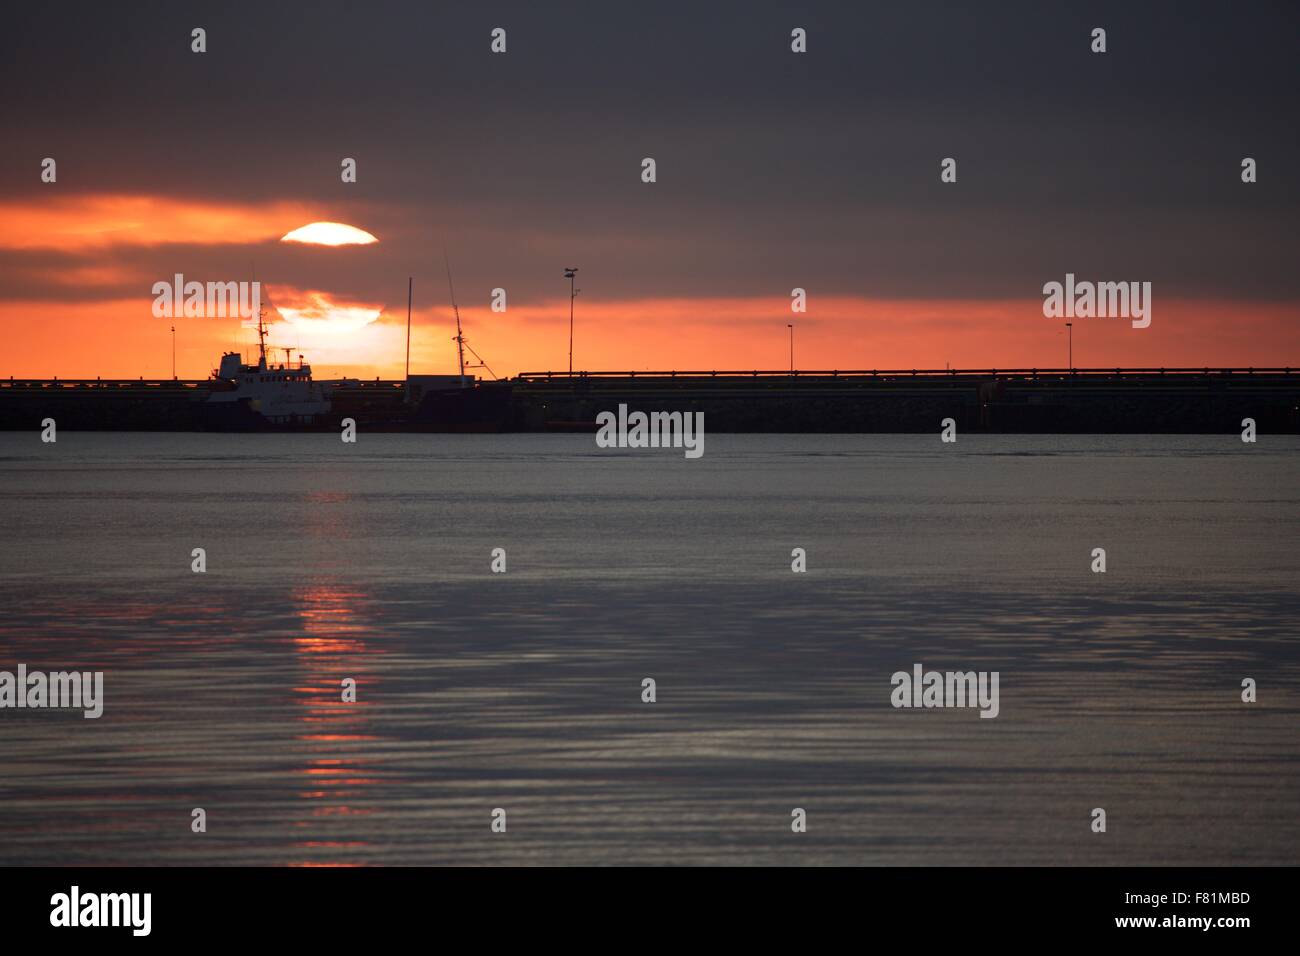 The midnight summer sun sets on the Summer Solstice over the harbor in Reykjavik, Iceland Stock Photo